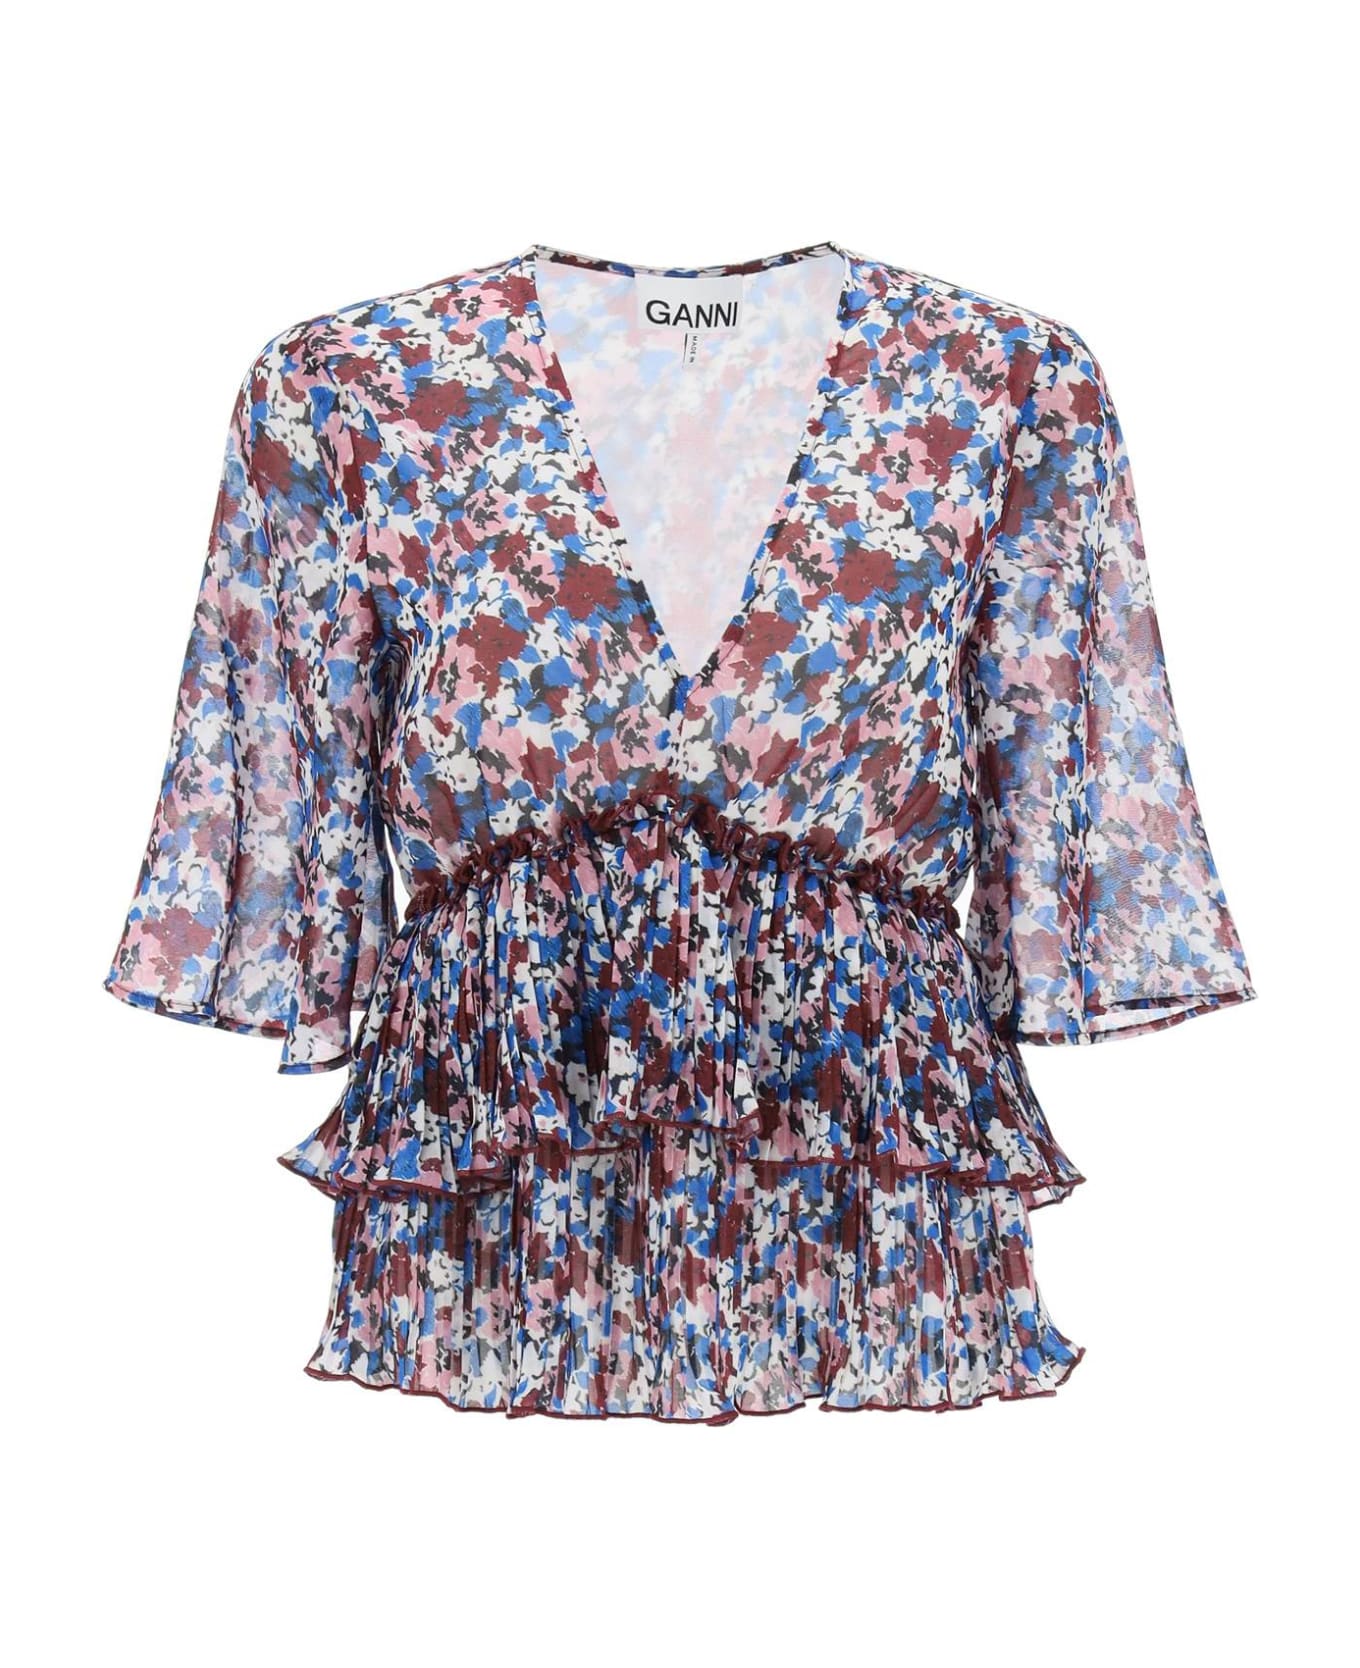 Ganni Pleated Blouse With Floral Motif - MULTICOLOUR ブラウス